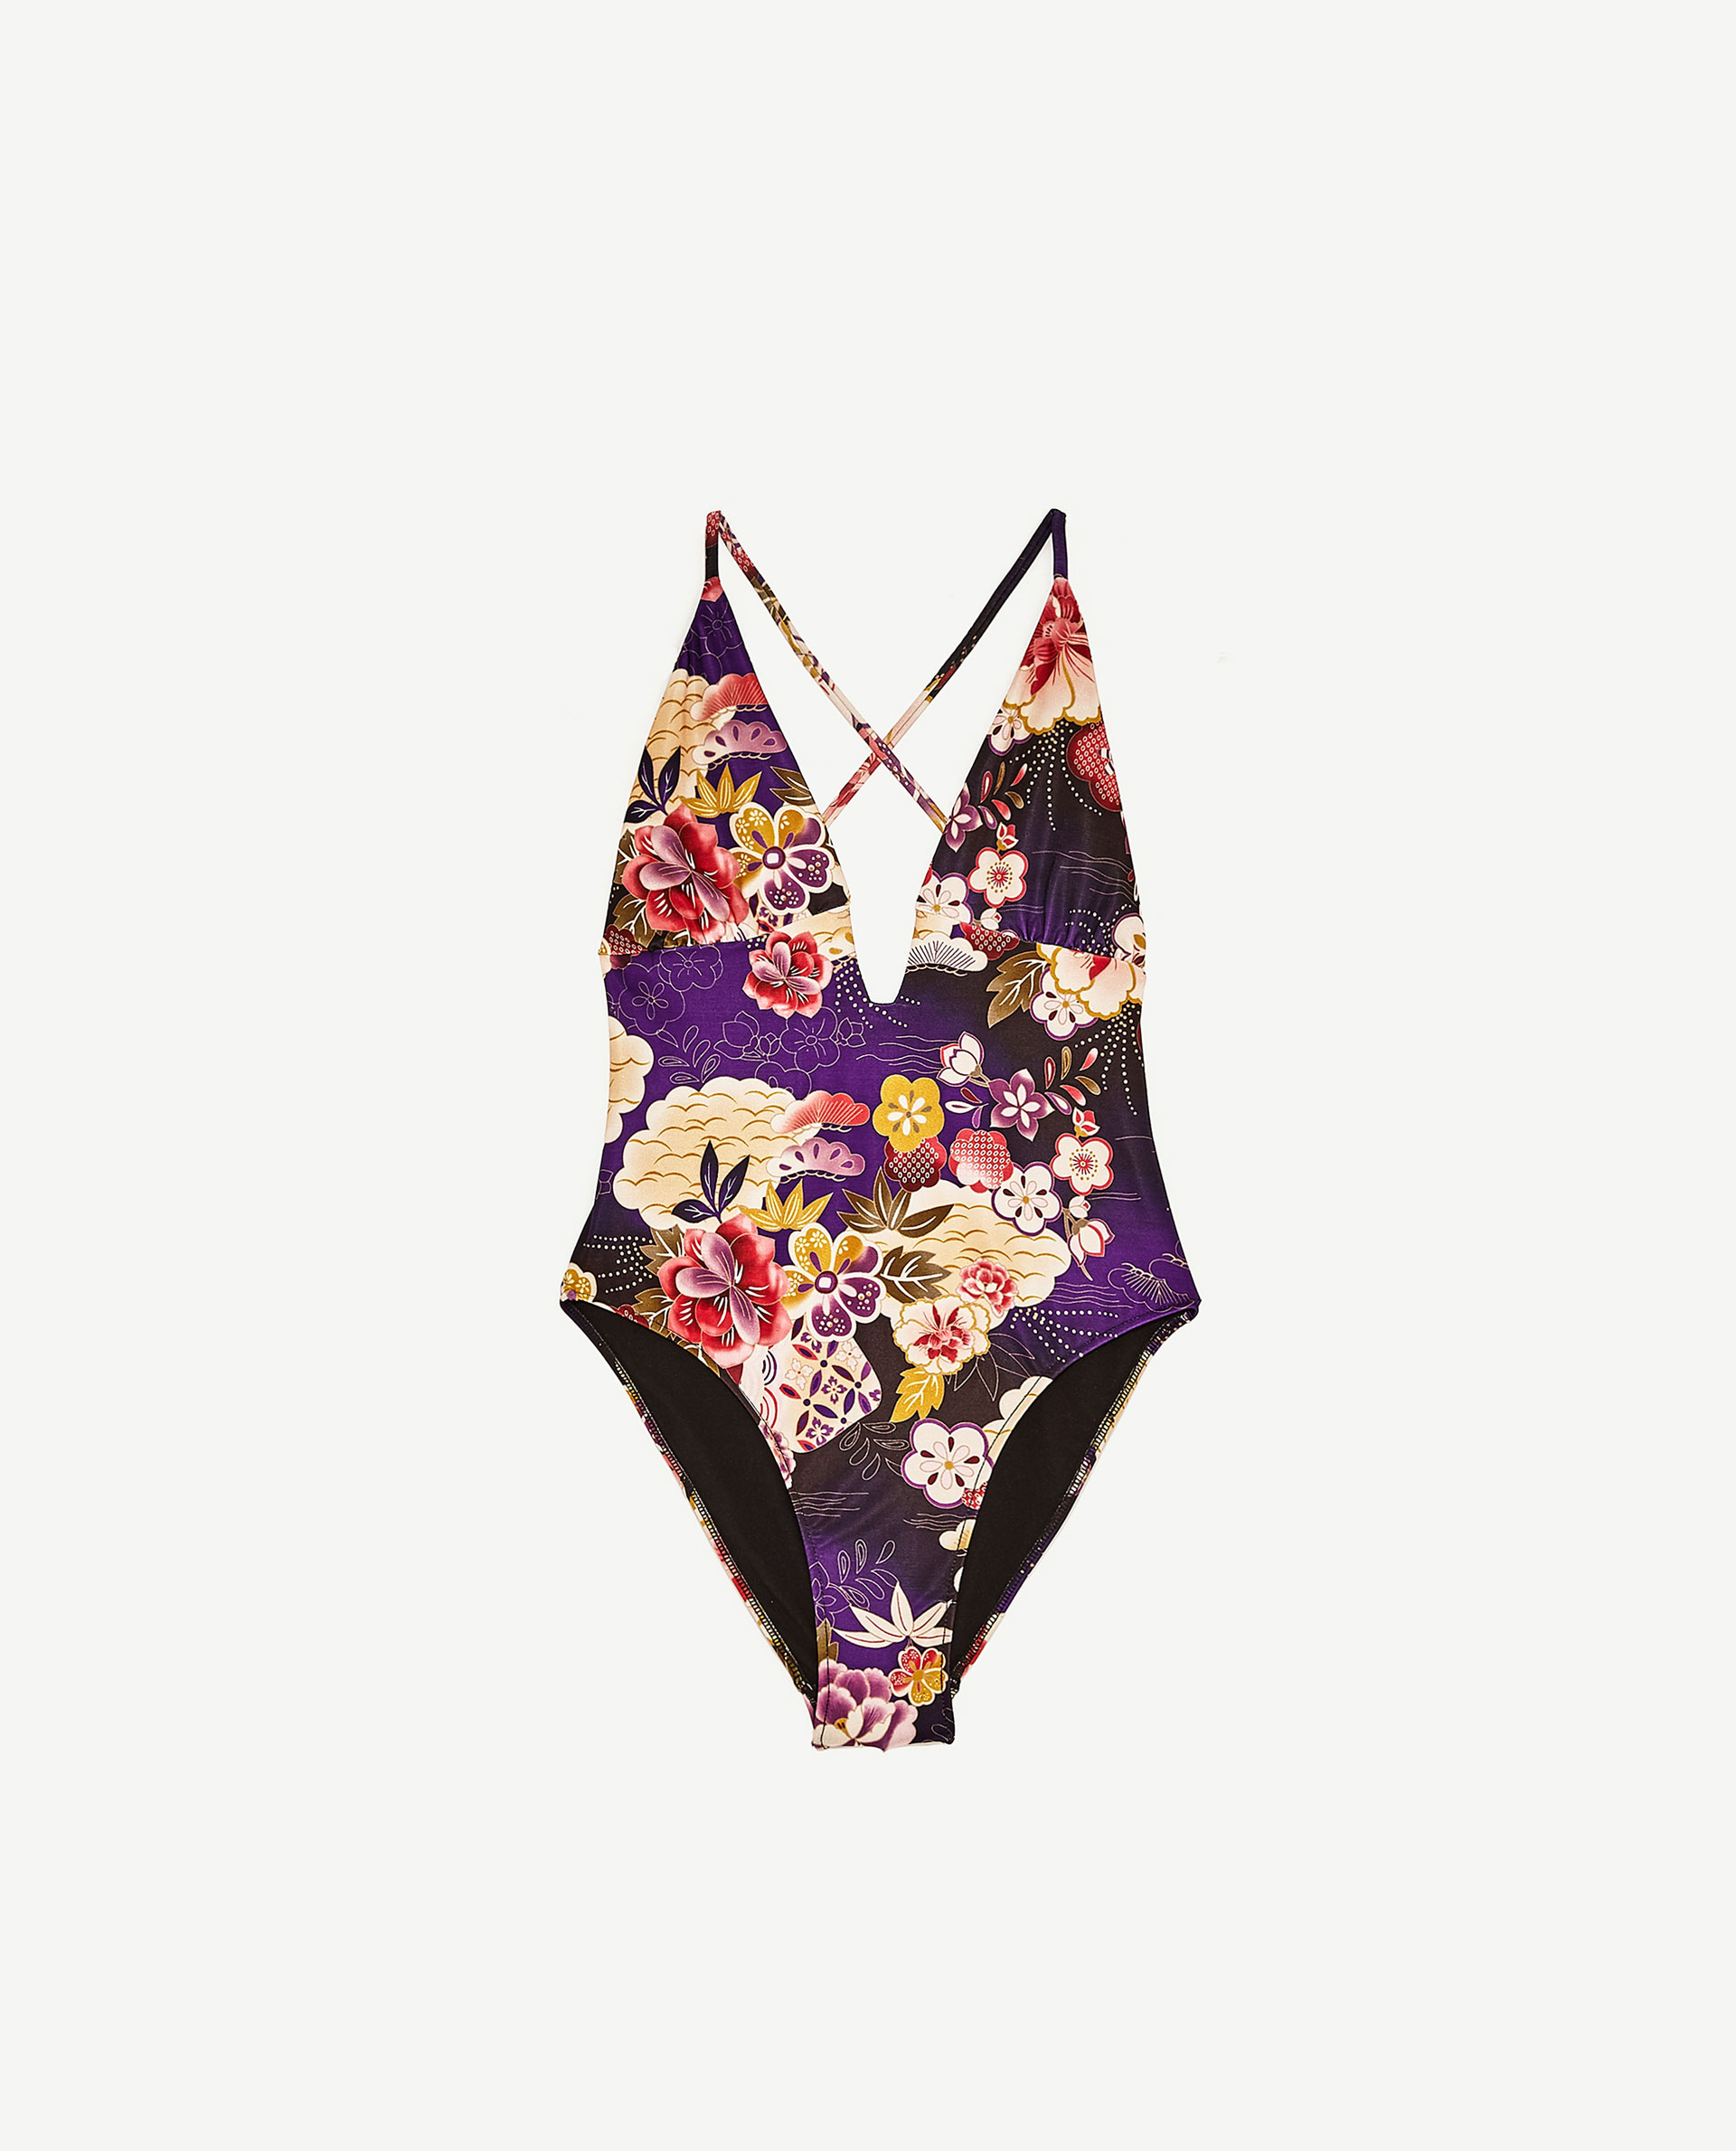 Zara floral swimsuit - My Nametags